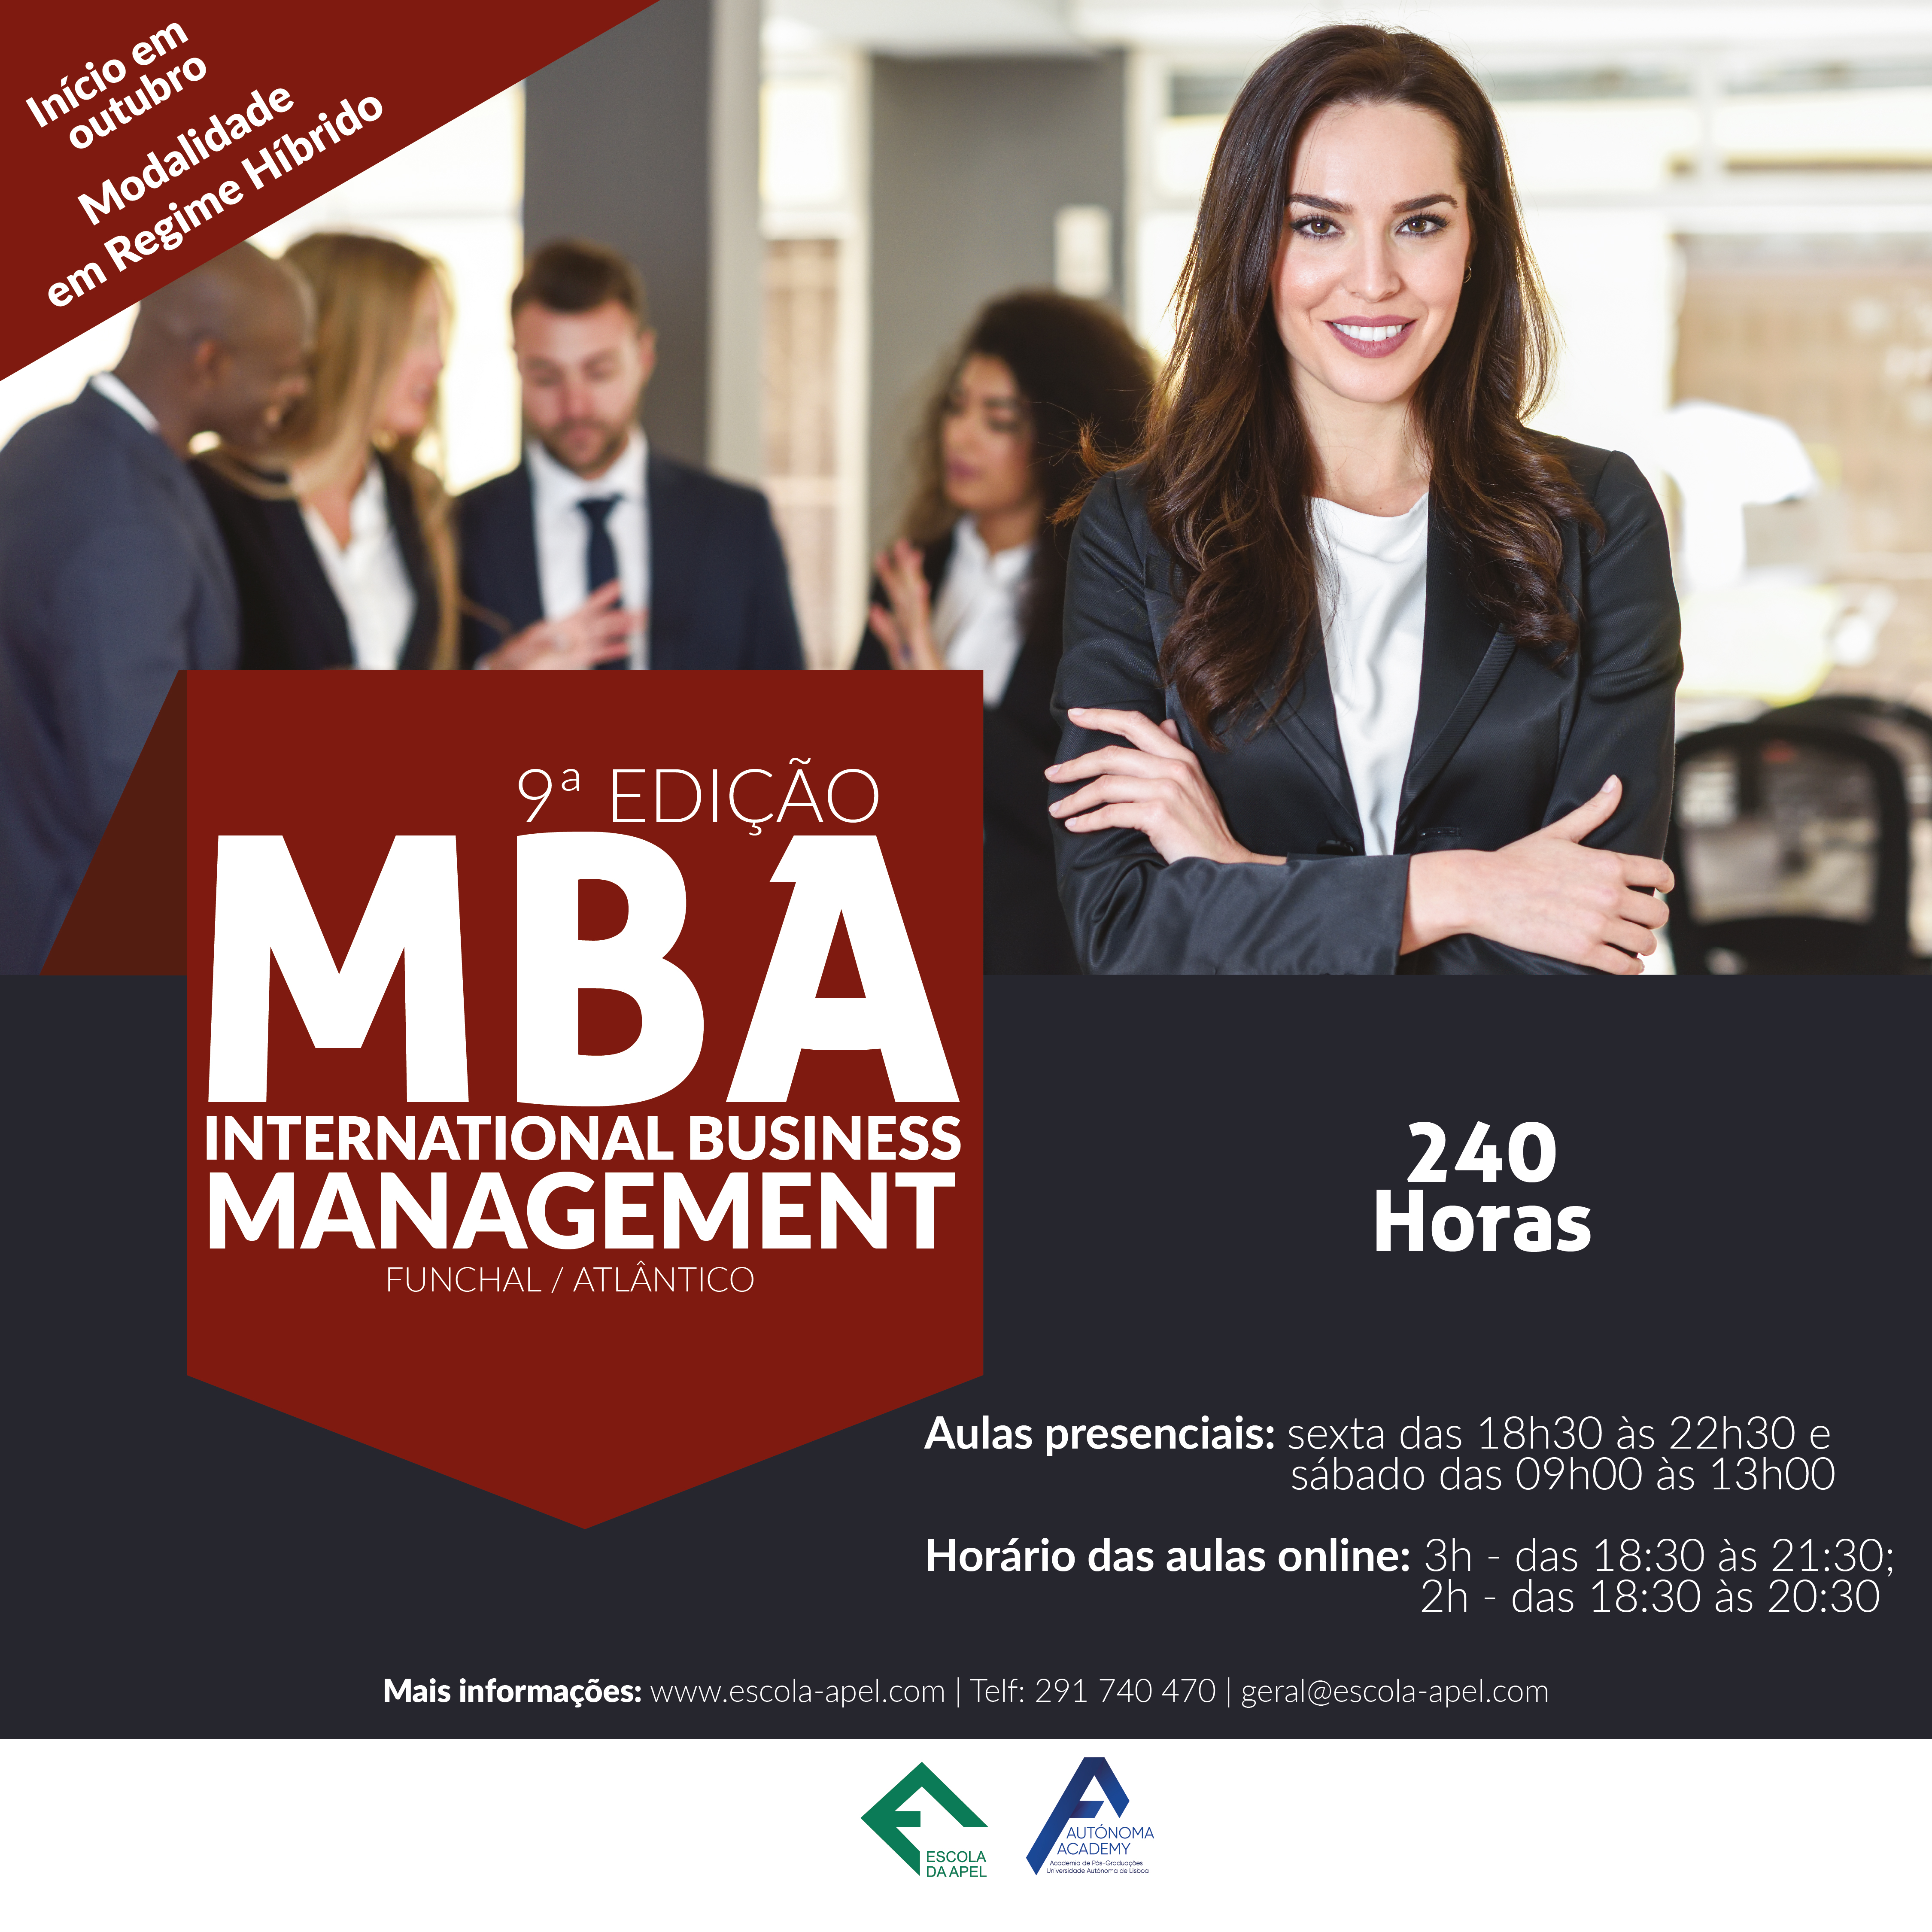 MBA – International Business Management (Funchal/Atlântico)